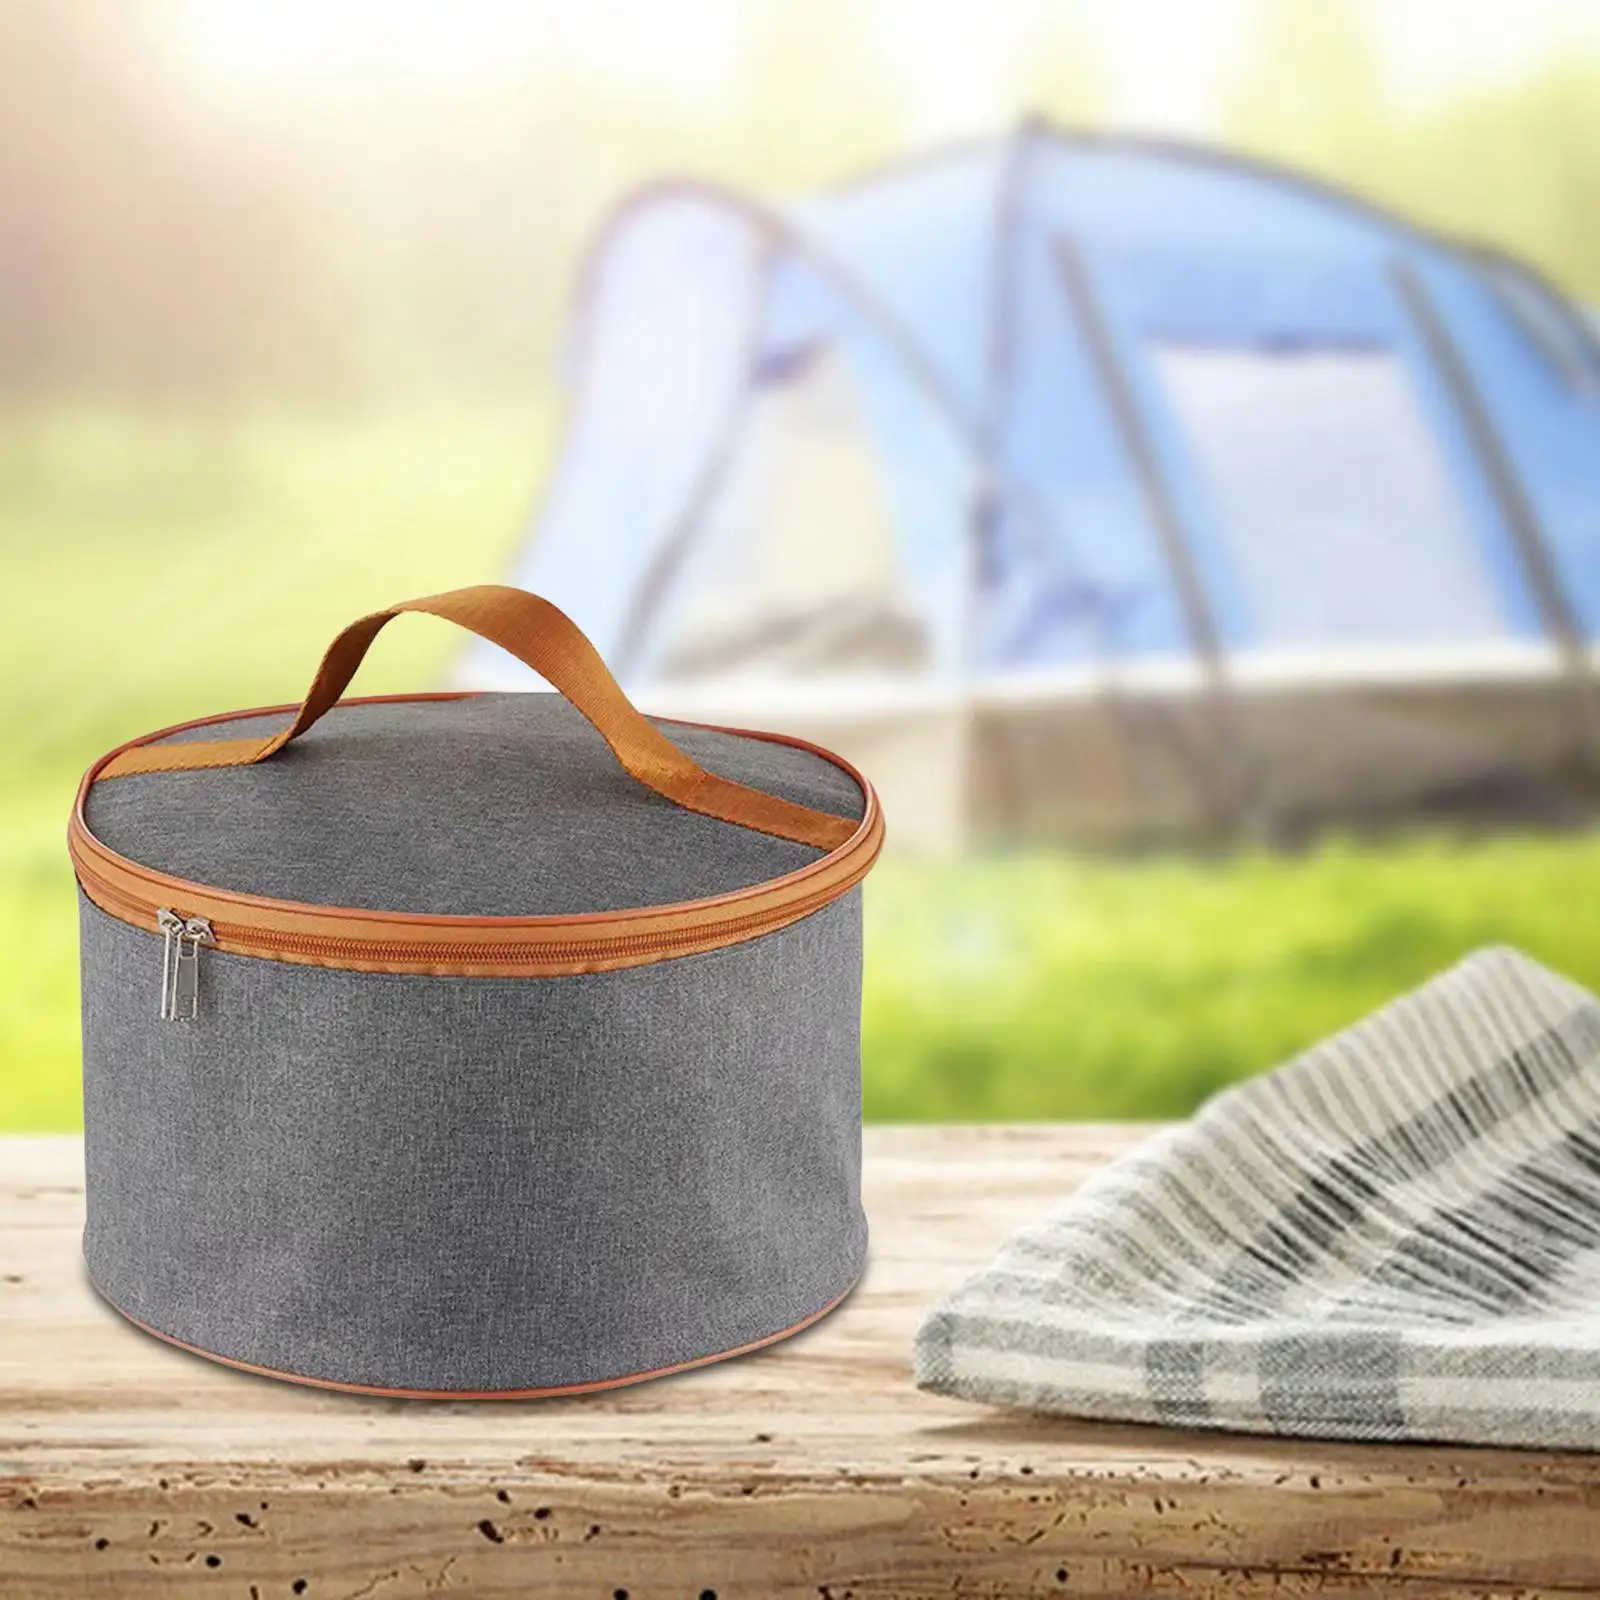 Camping Cookware Carry Bag Portable Utility Tote Bag Camping Pot Storage Bag for Hiking Outdoor Sports Backpacking Picnic Beach